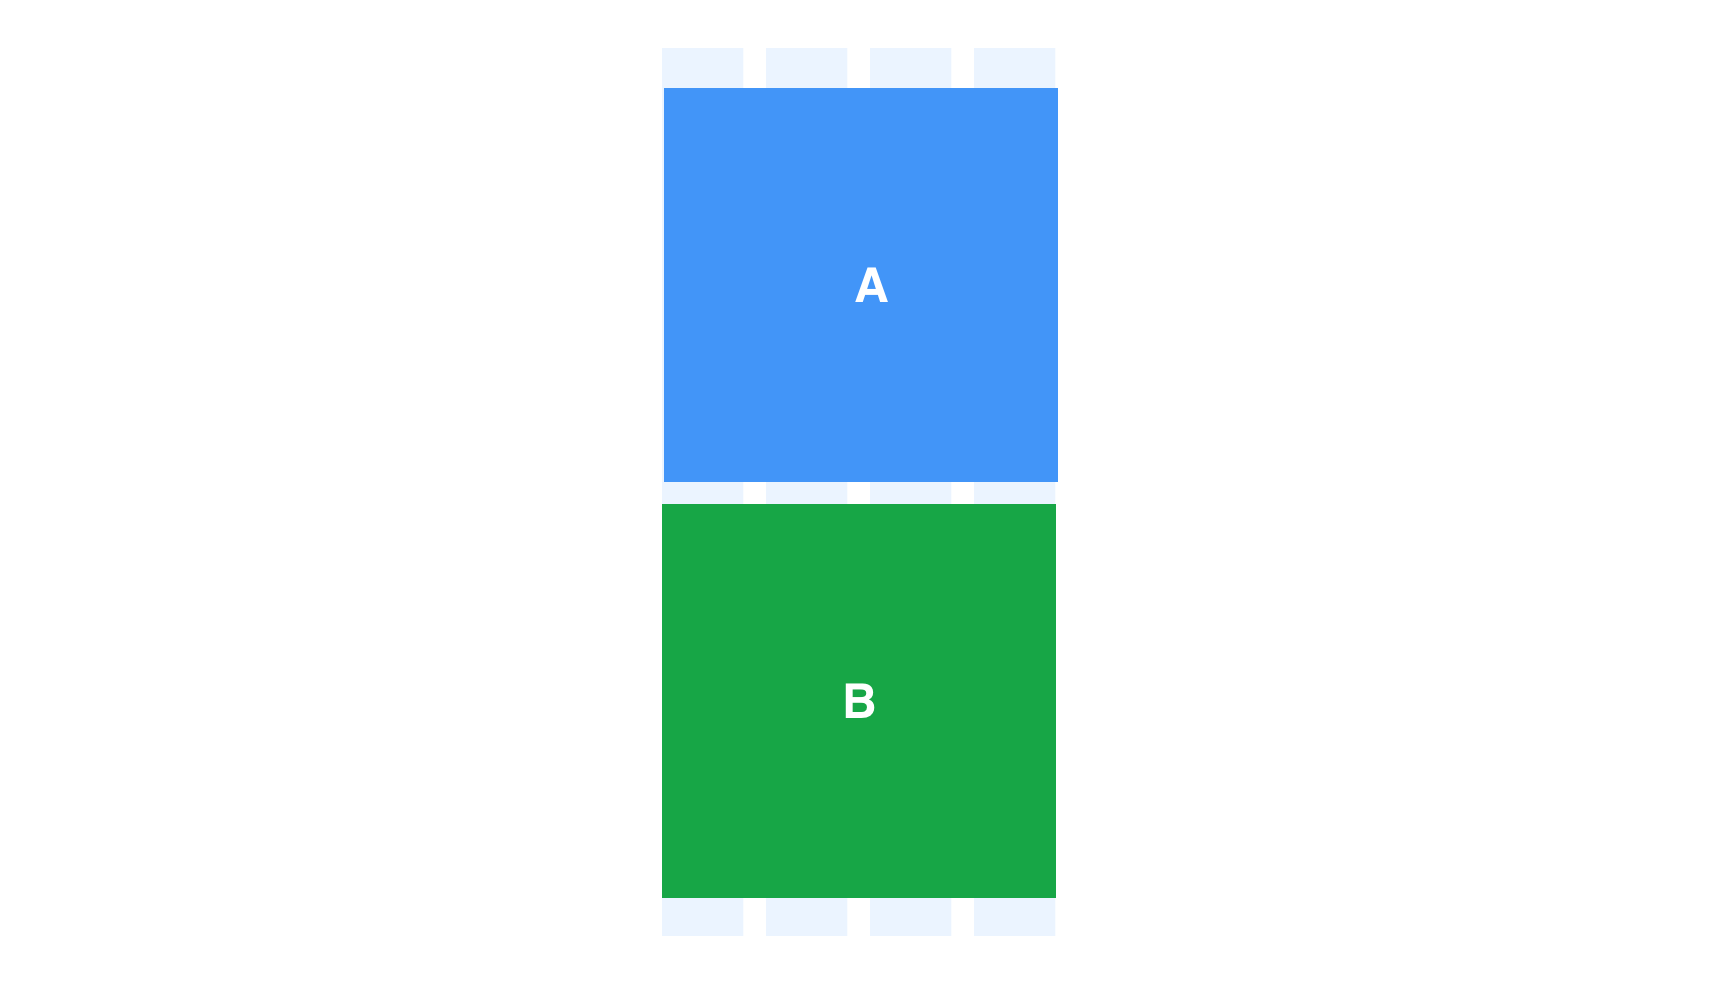 Two blocks (A, B) spanning 4 columns each, on a 4 column grid, stacked on top of each other in the correct reflow order. Block A stacked on top of block B.